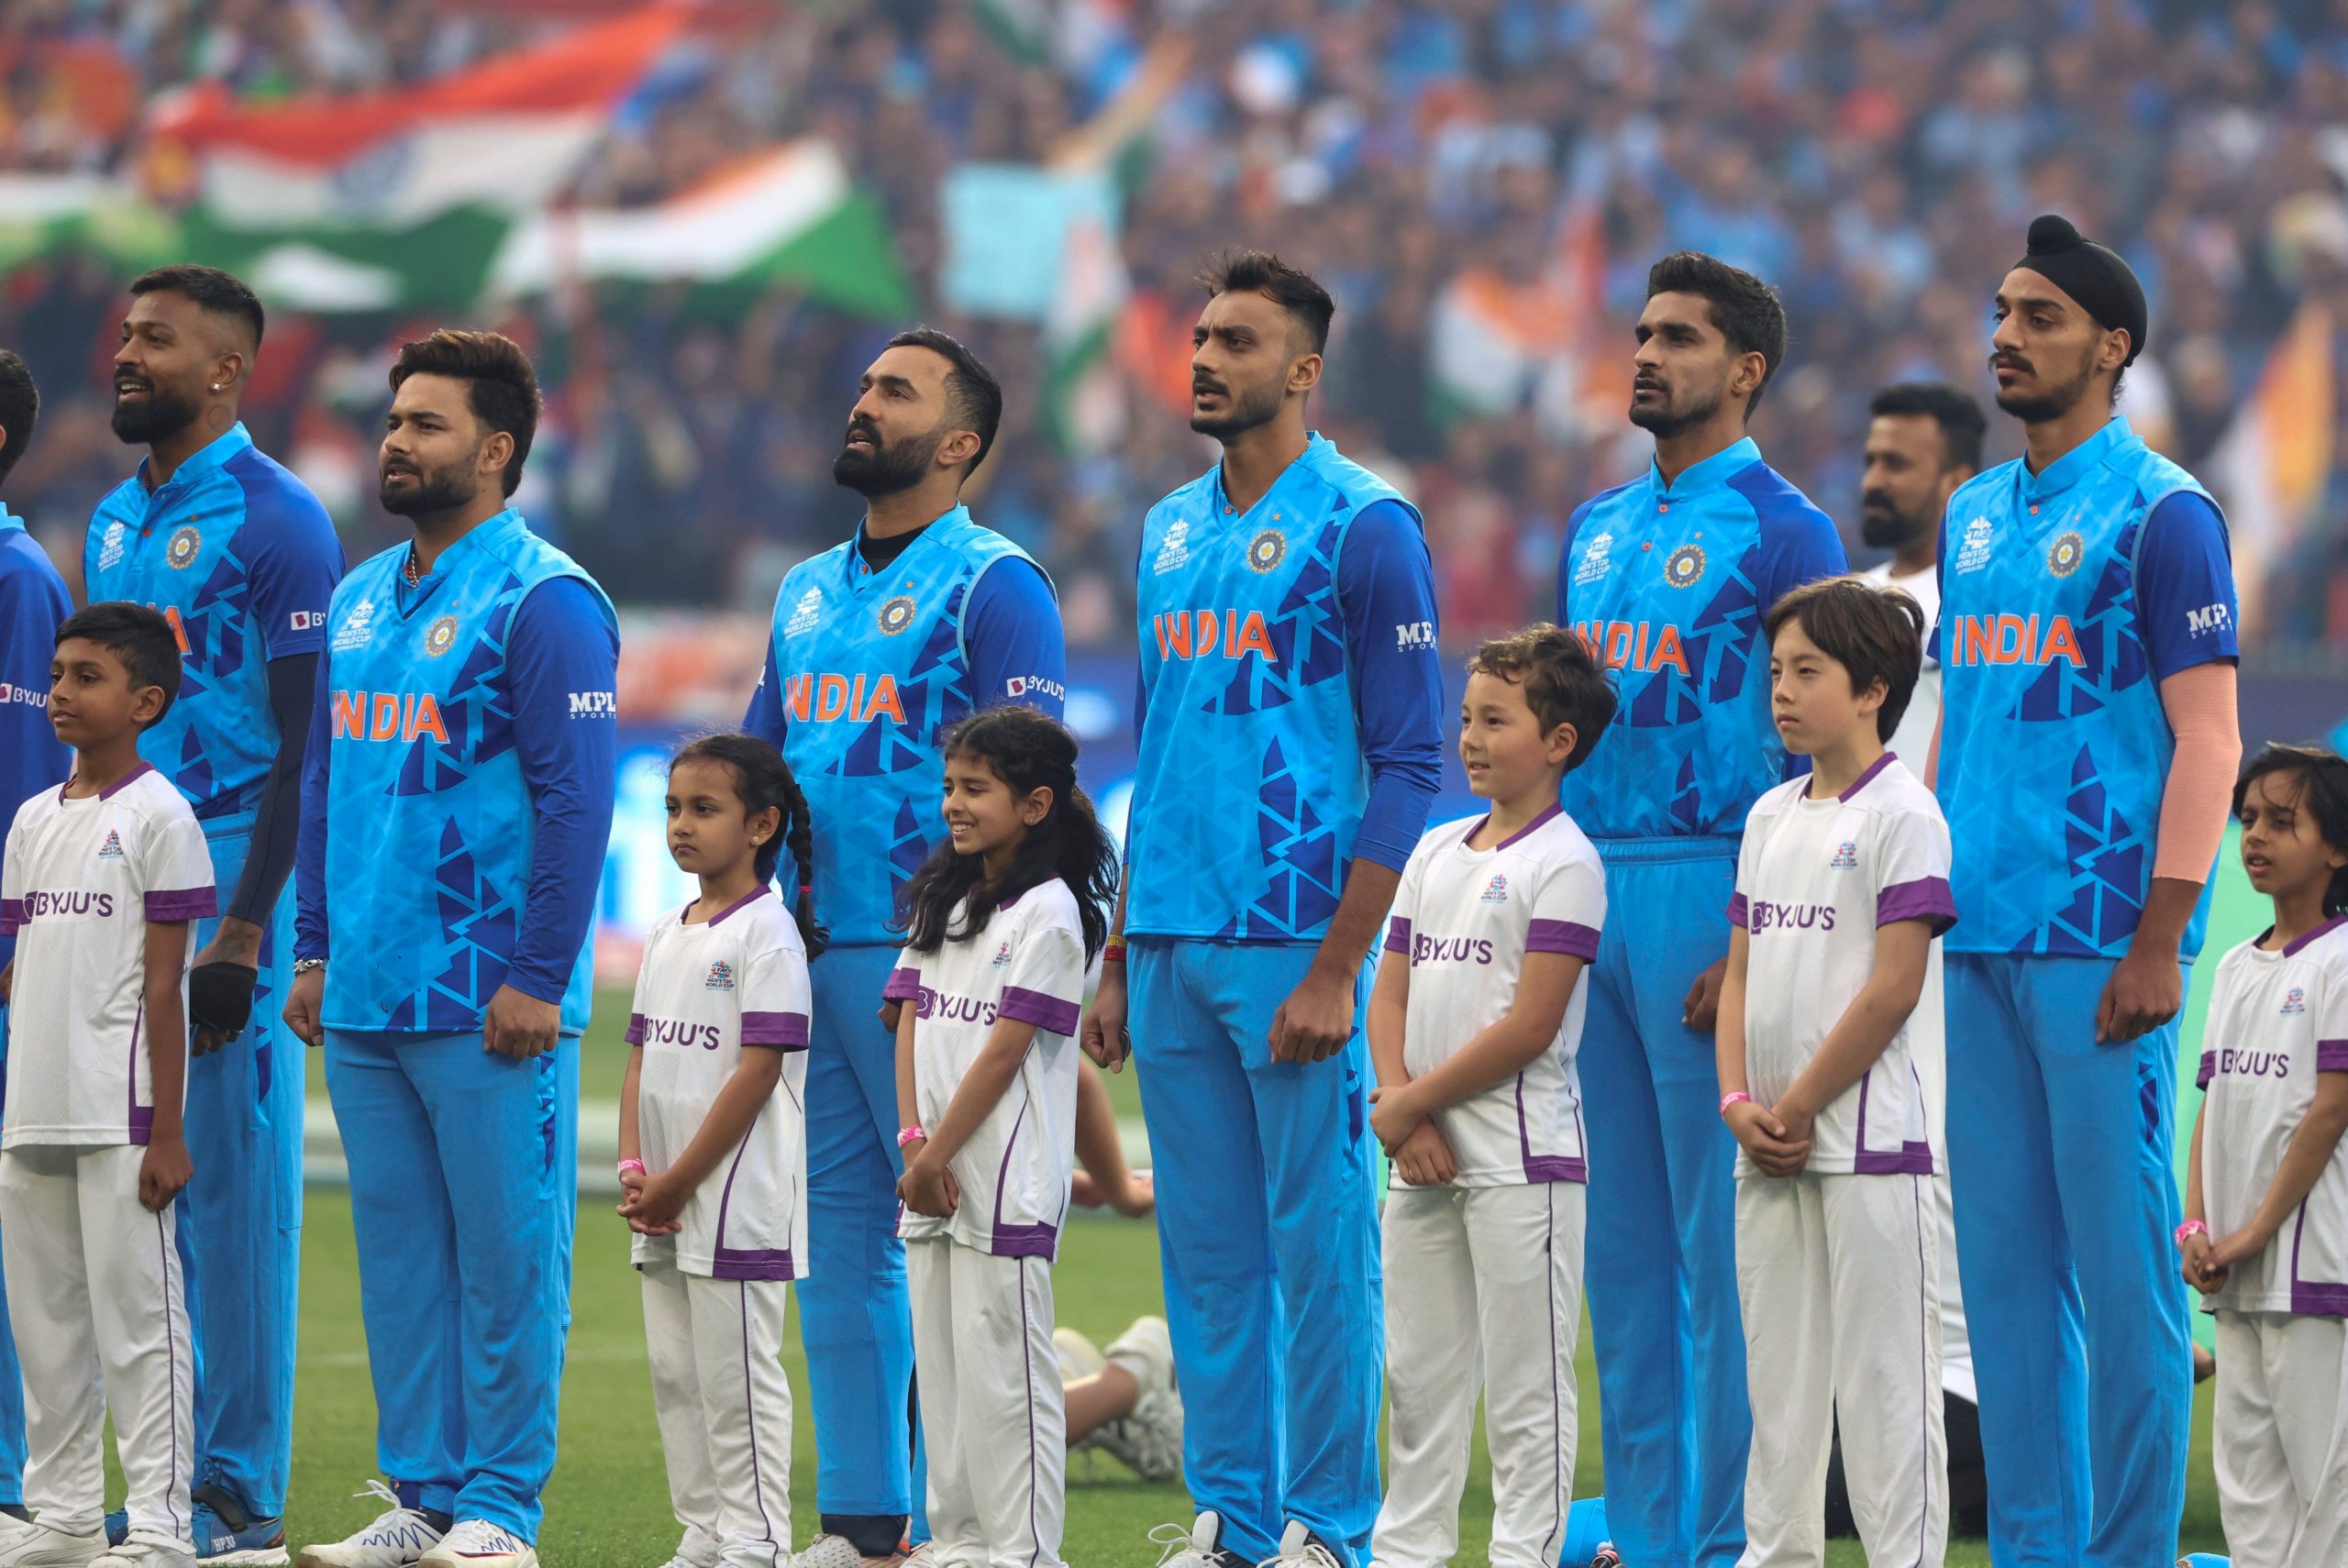 India vs Netherlands T20 WC 2022: Records, stats and pitch report